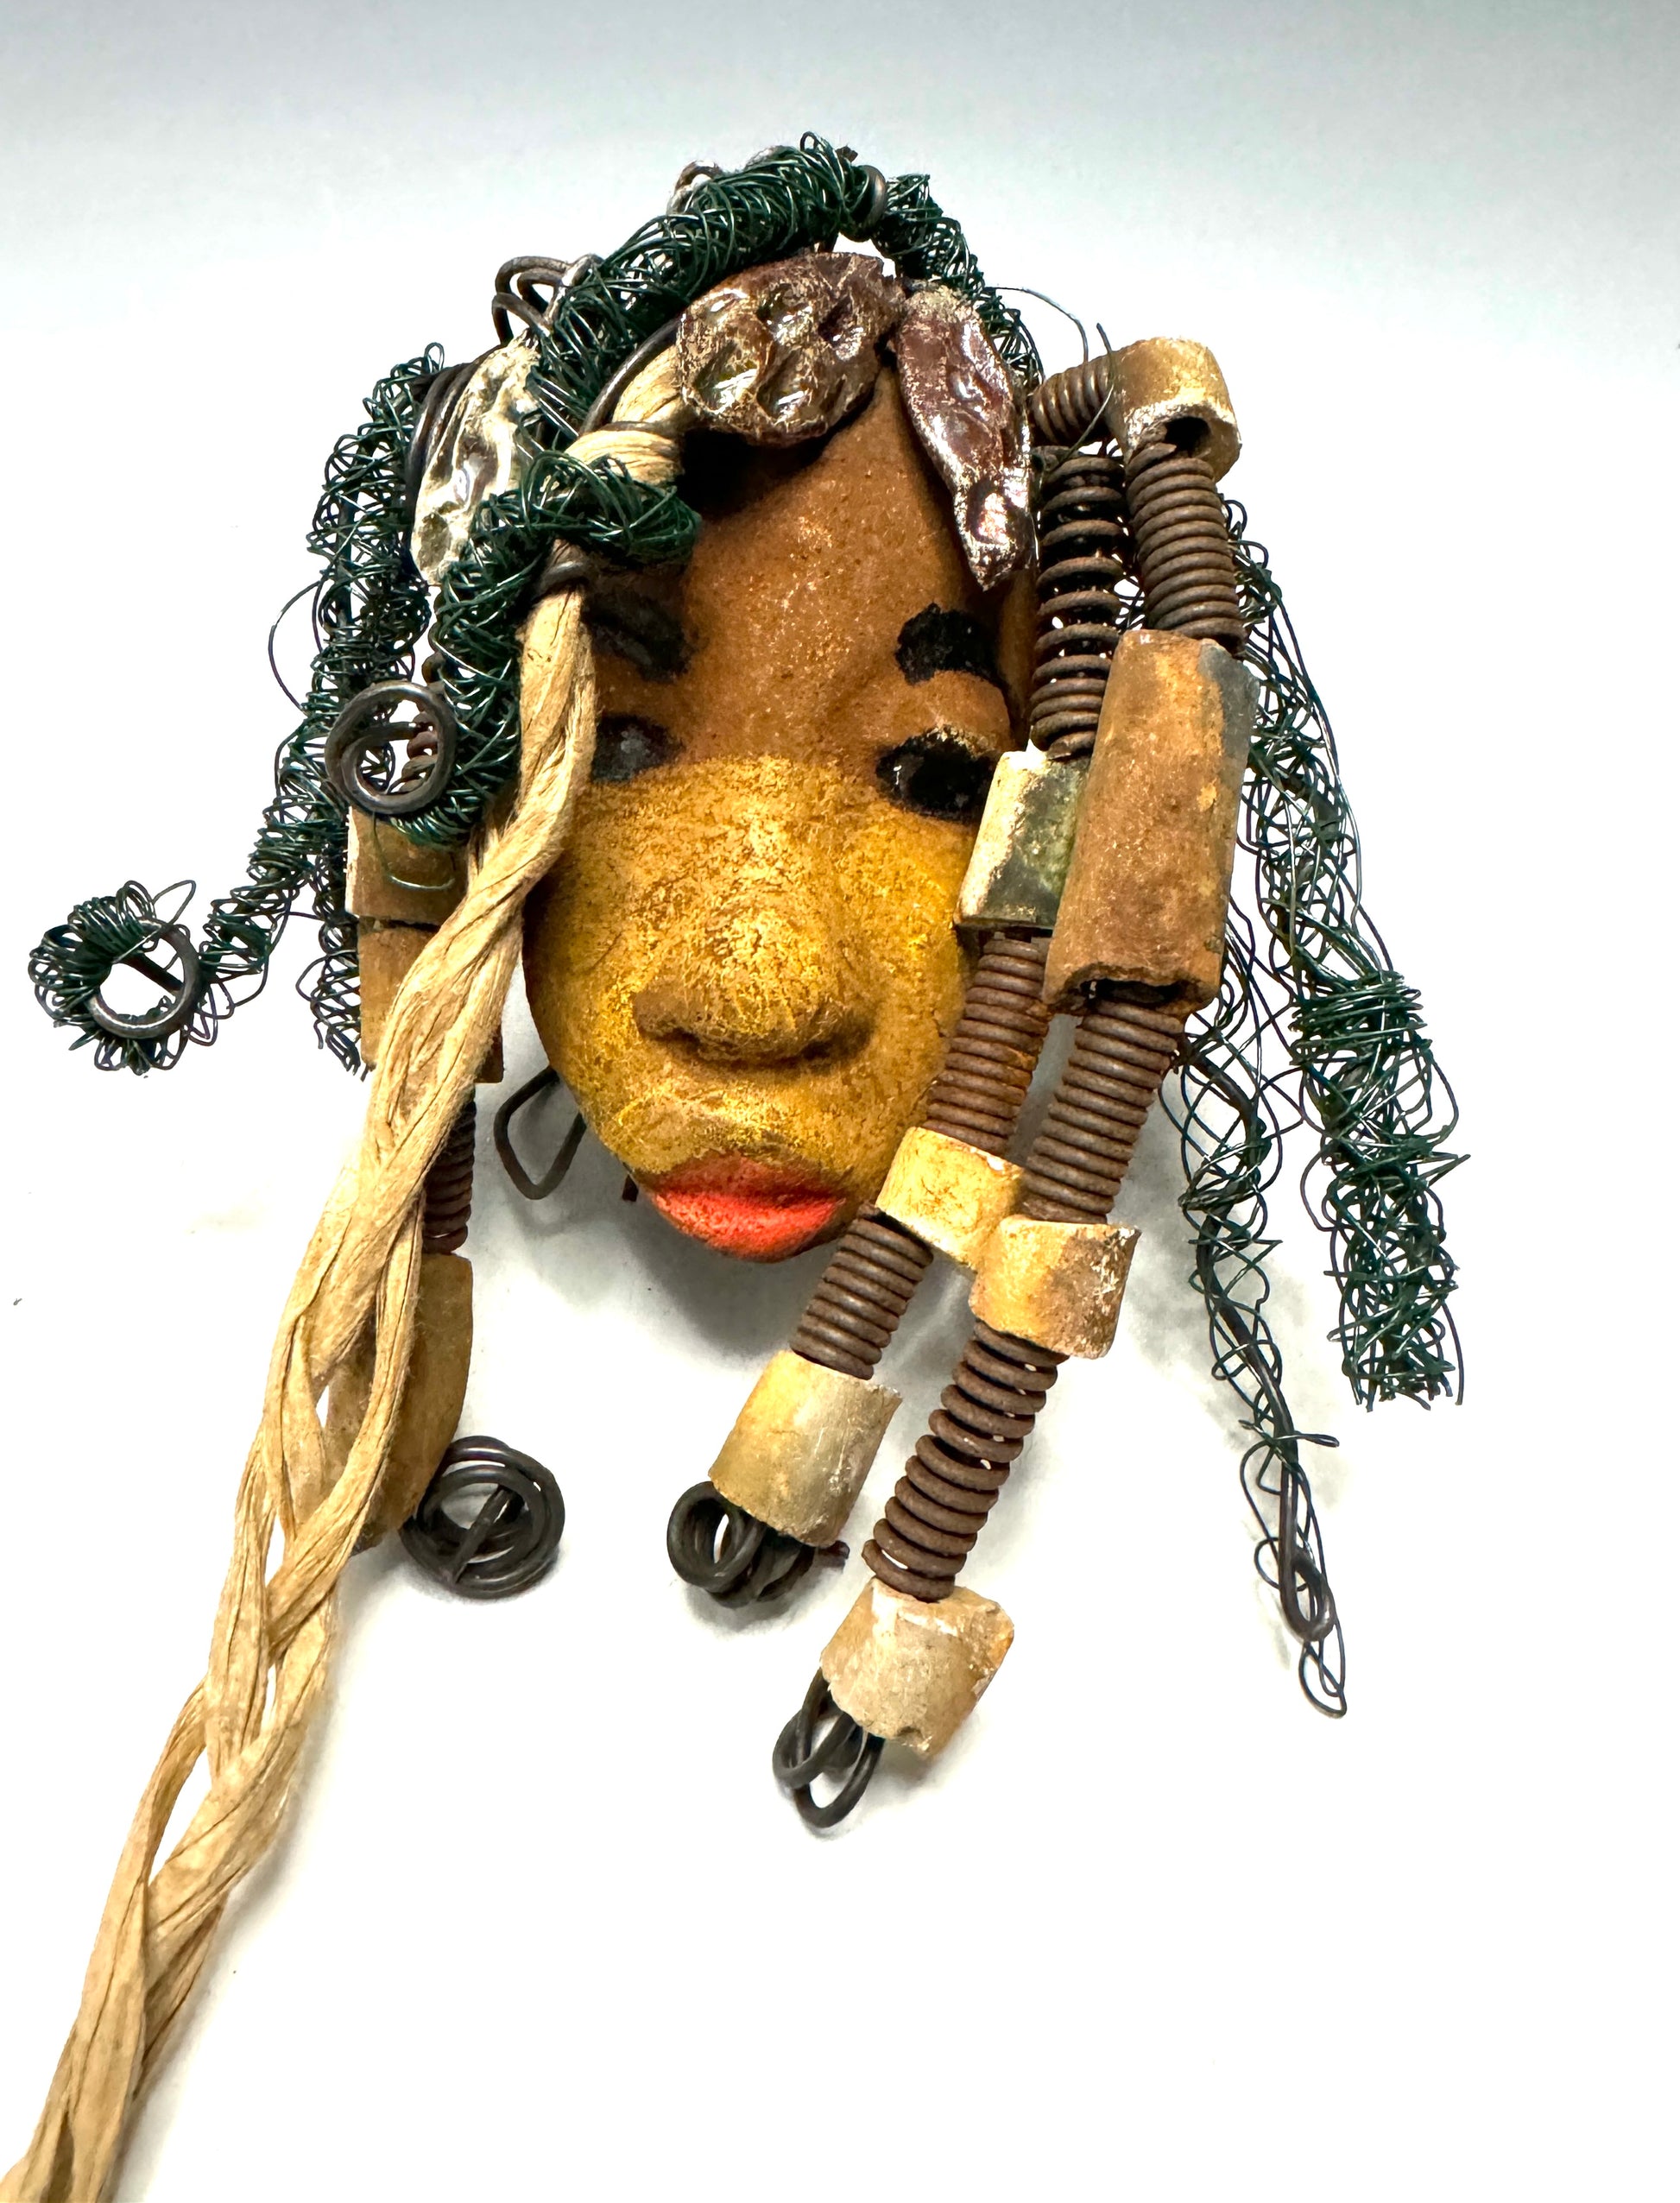 Wanda is a 5" x 8" Raku-fired mask, featuring 16 and 24-gauge wire over 20ft in length. Her two tone honey brown complexion is the perfect contrast to her green-coiled locs. Get her this holiday season at a discount, making it the perfect time to start a collection or gift her as a special surprise.